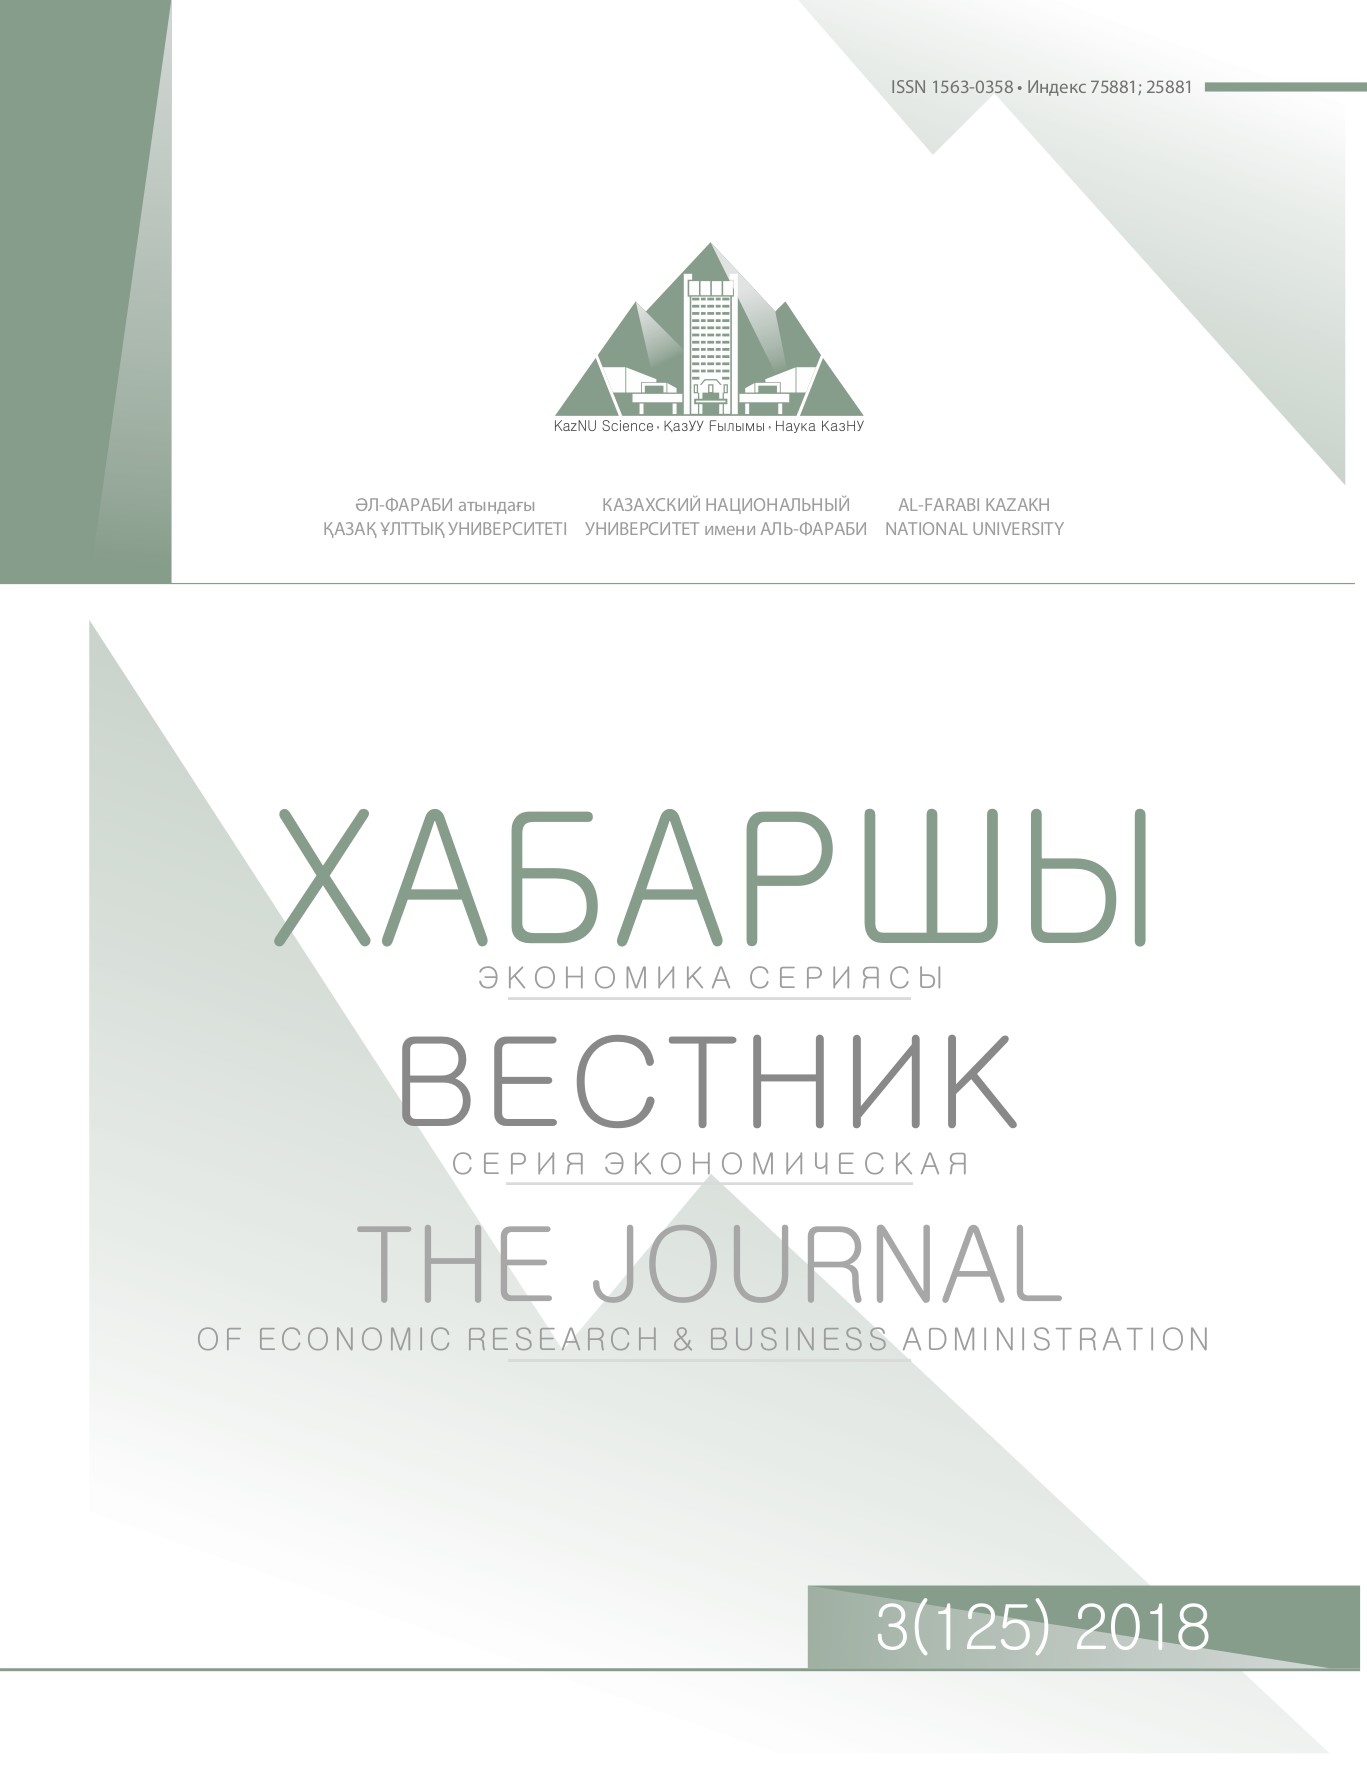 					View Vol. 125 No. 3 (2018): The Journal of Economic Research & Business Administration
				